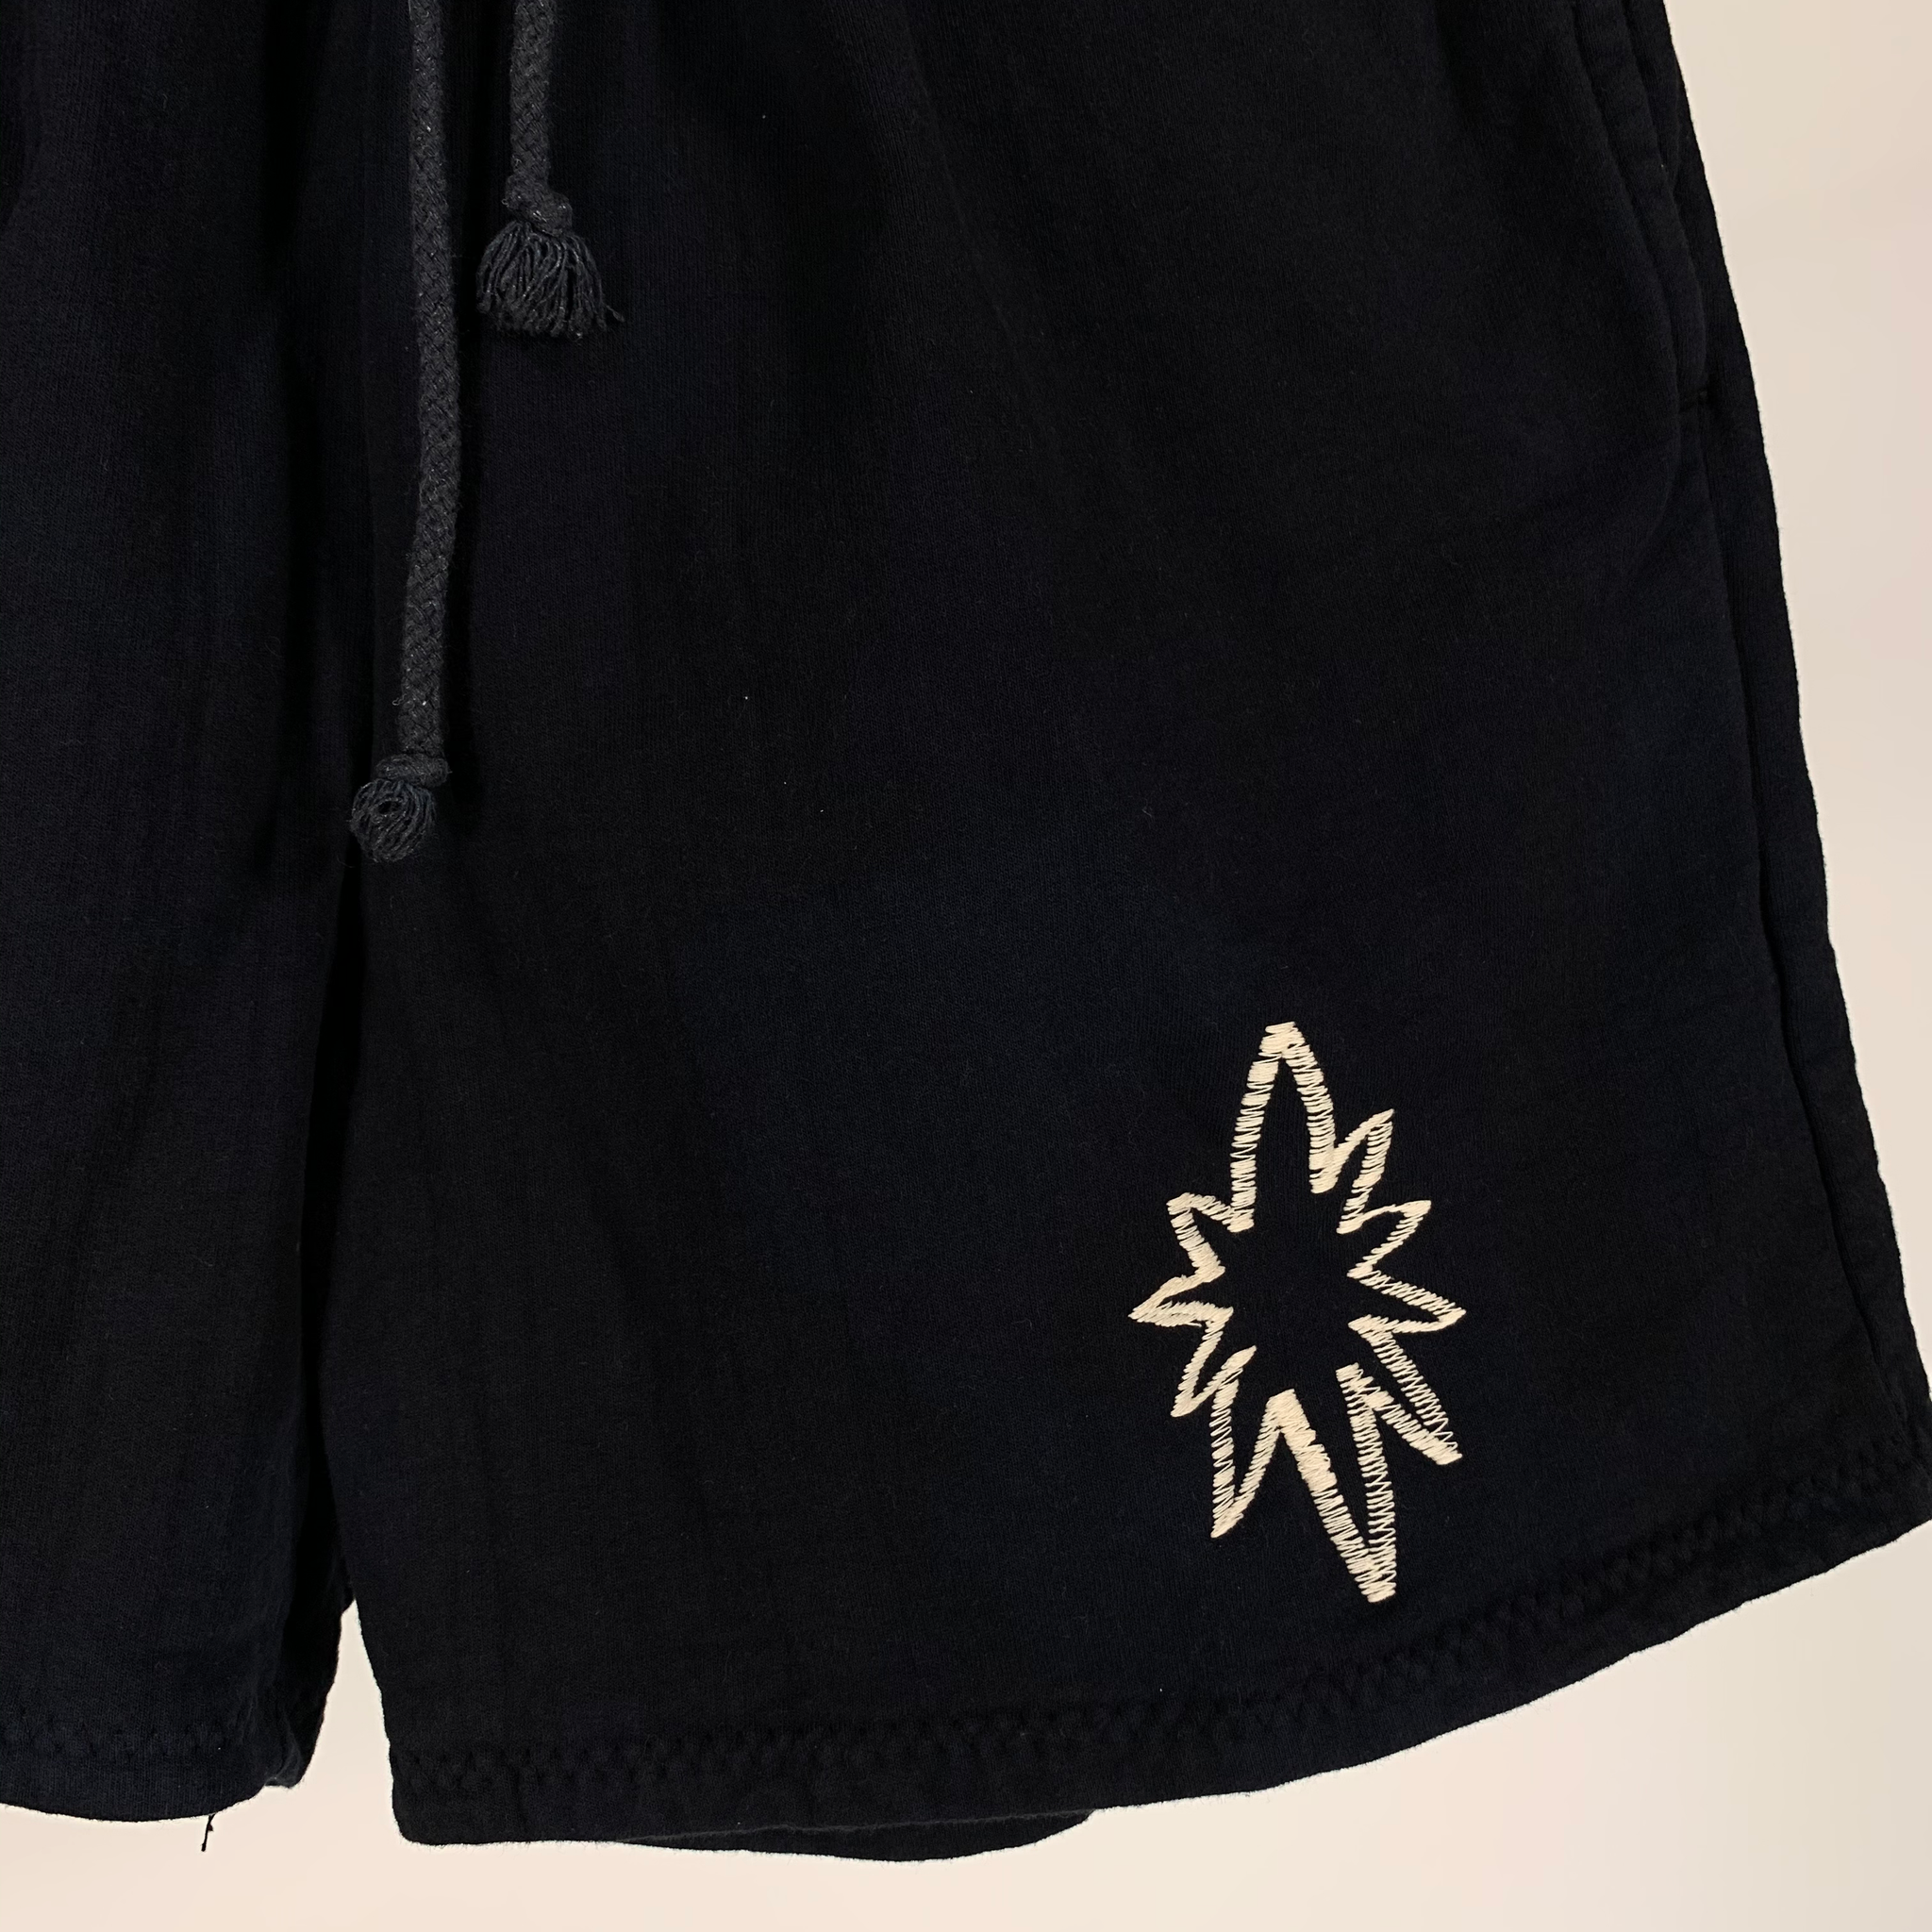 Home sewn embroidered shorts - XL